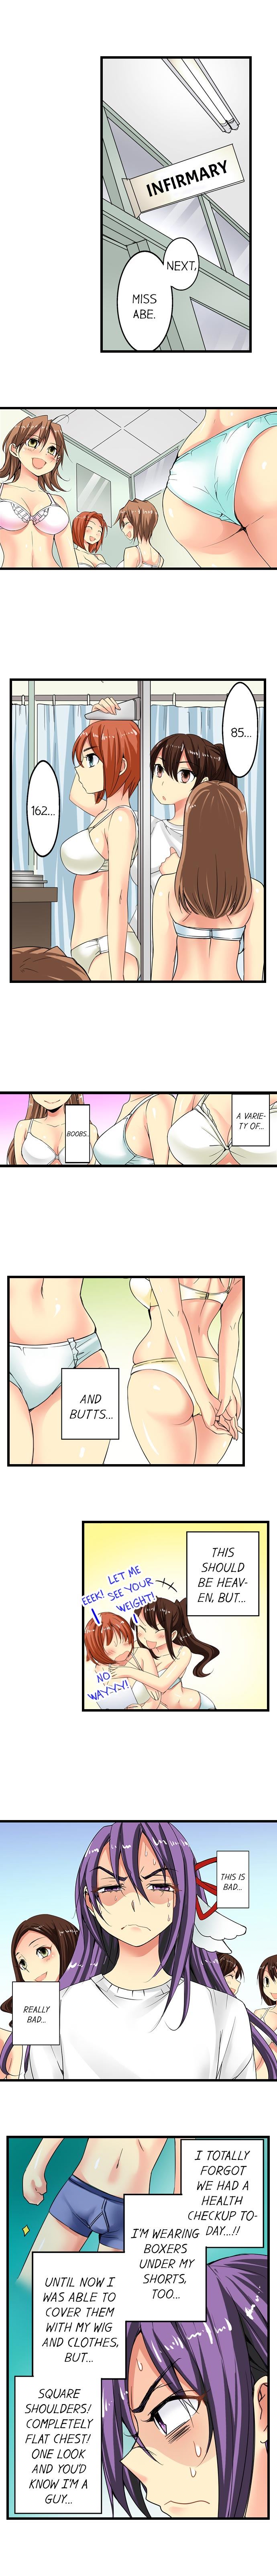 Sneaked Into A Horny Girls’ School - Chapter 10 Page 2